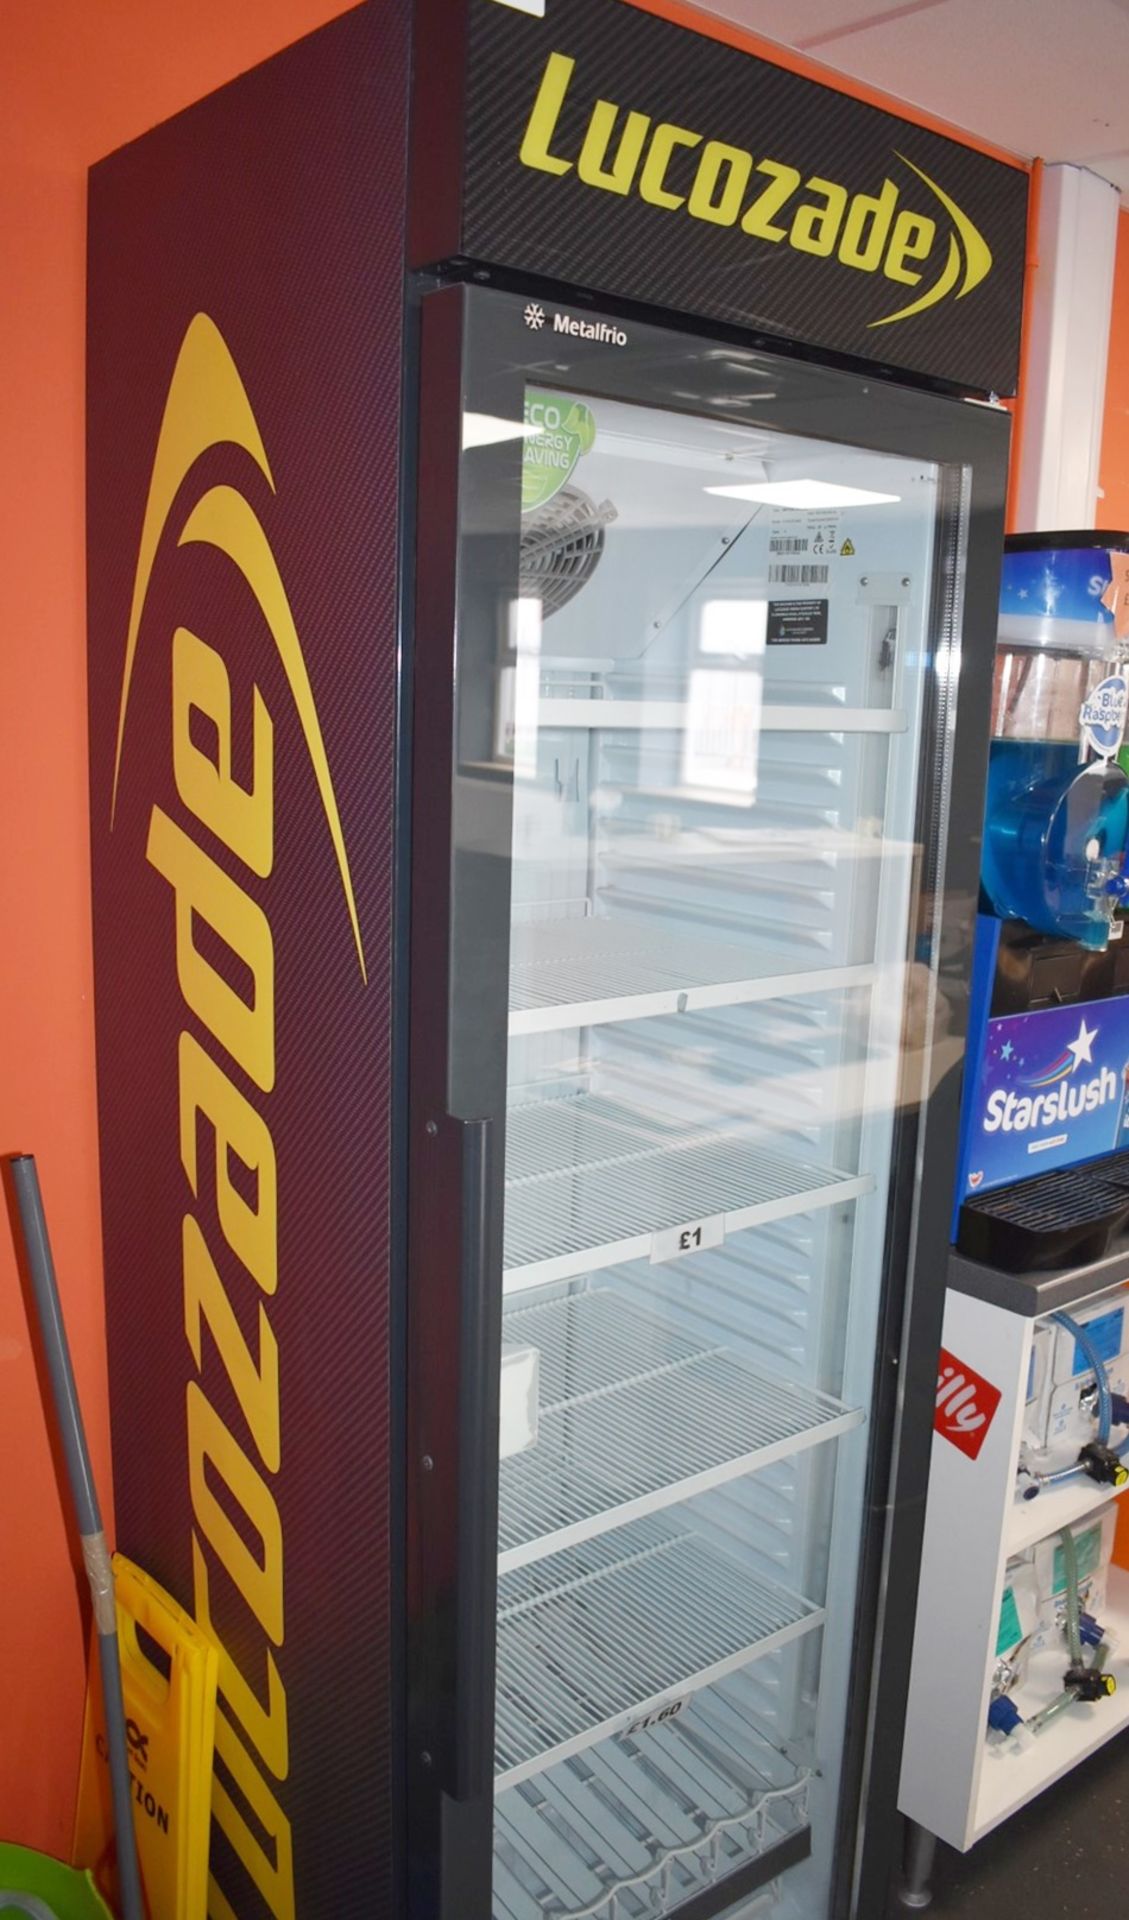 1 x Lucozade Upright Showcase Illuminated Drinks Chiller By Metalfrio - 230v - H200 x W61 x D59 - Image 5 of 10